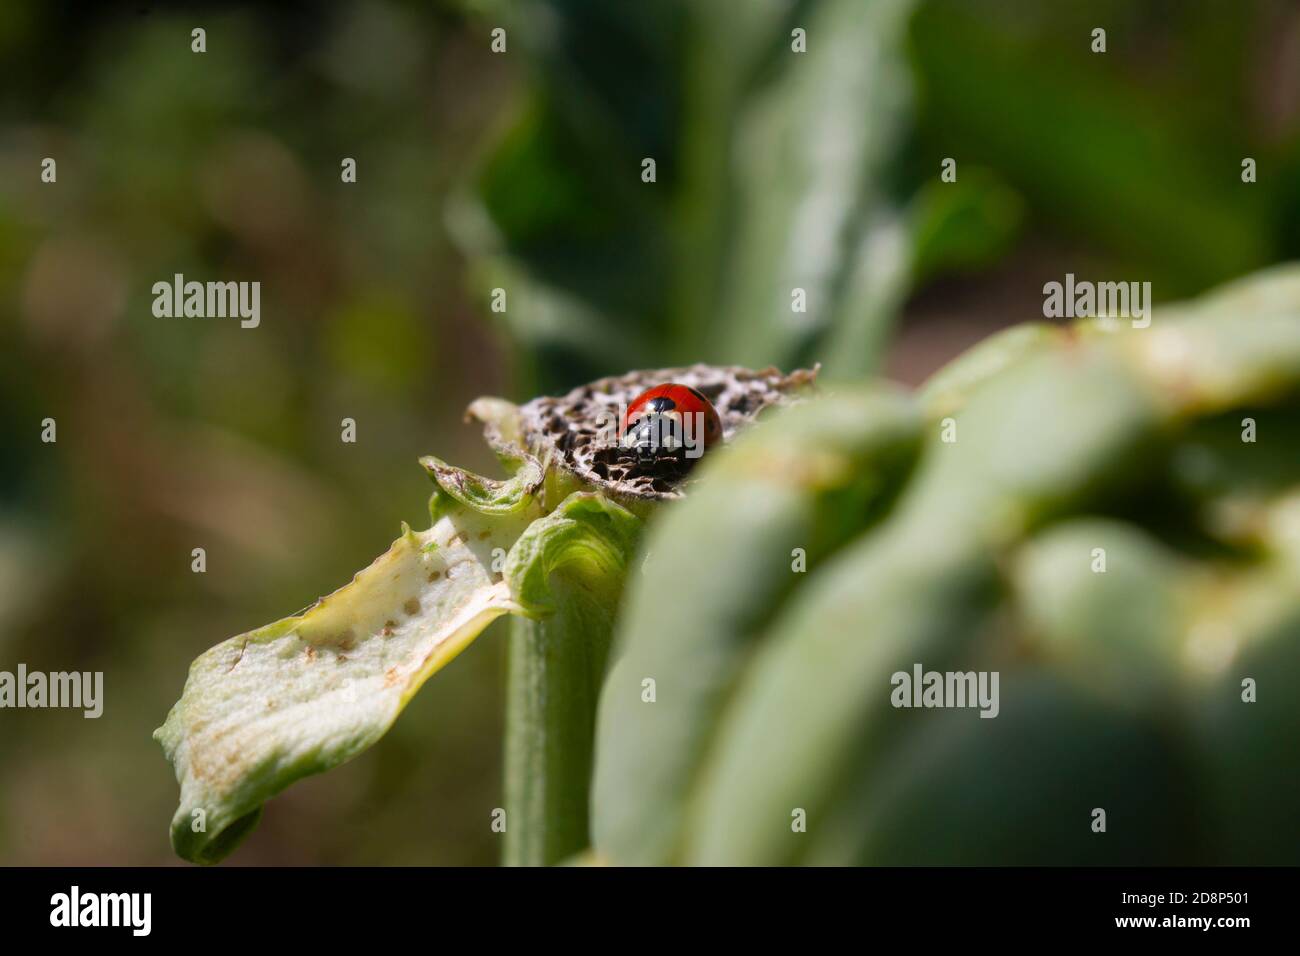 Ladybug in vegetable garden.This insect helps to eliminate destructive pests like aphids.Natural pest control. Stock Photo